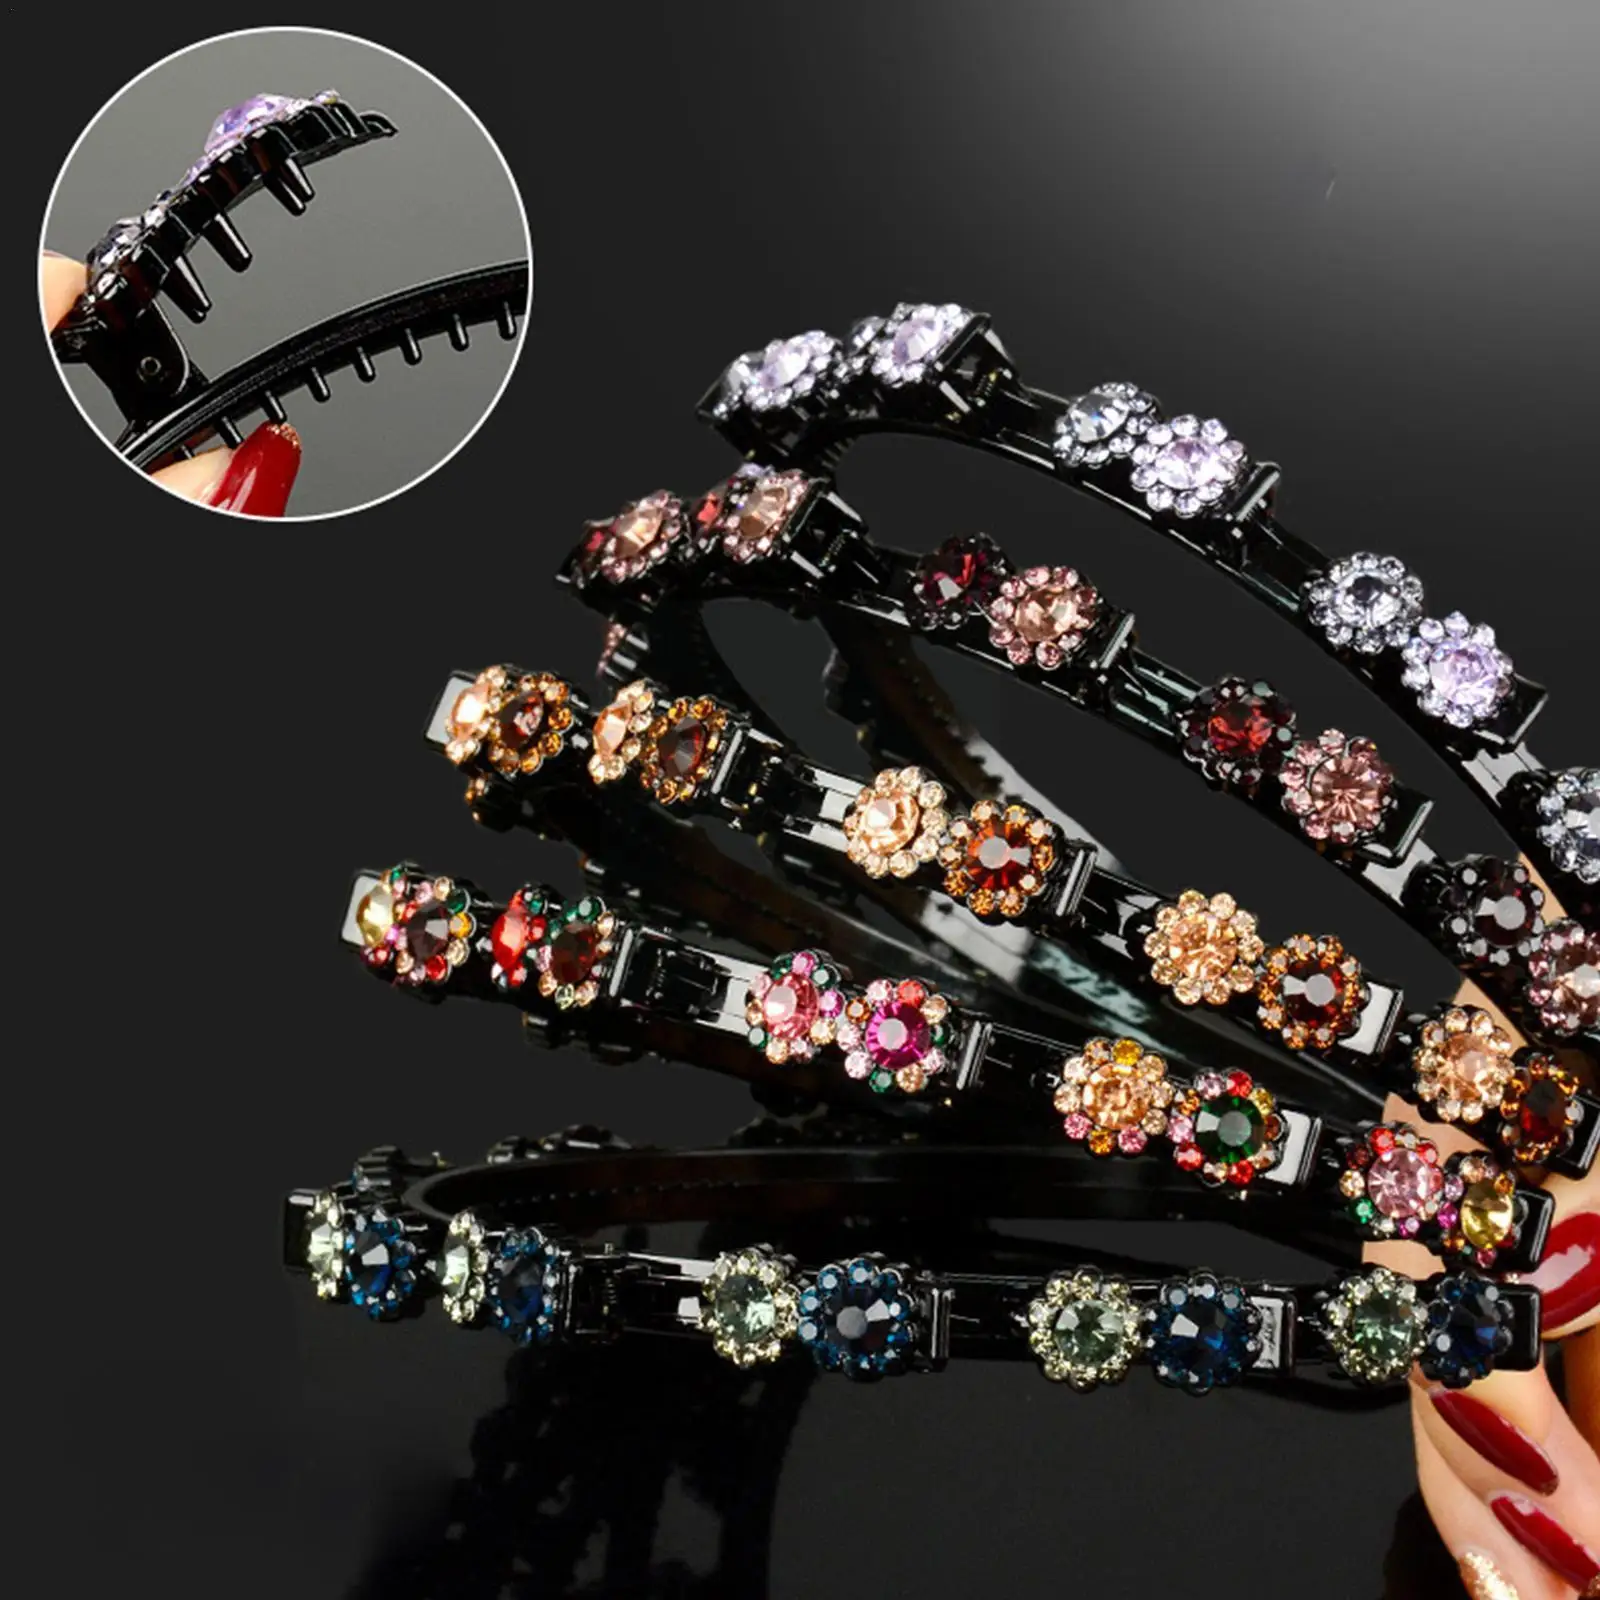 

Sparkling Crystal Double Layer Hairband Bands Clip Twist Bangs Hoop Hair Woman Head Hairstyle Clips Clip Hairpin Braid Head V5X3